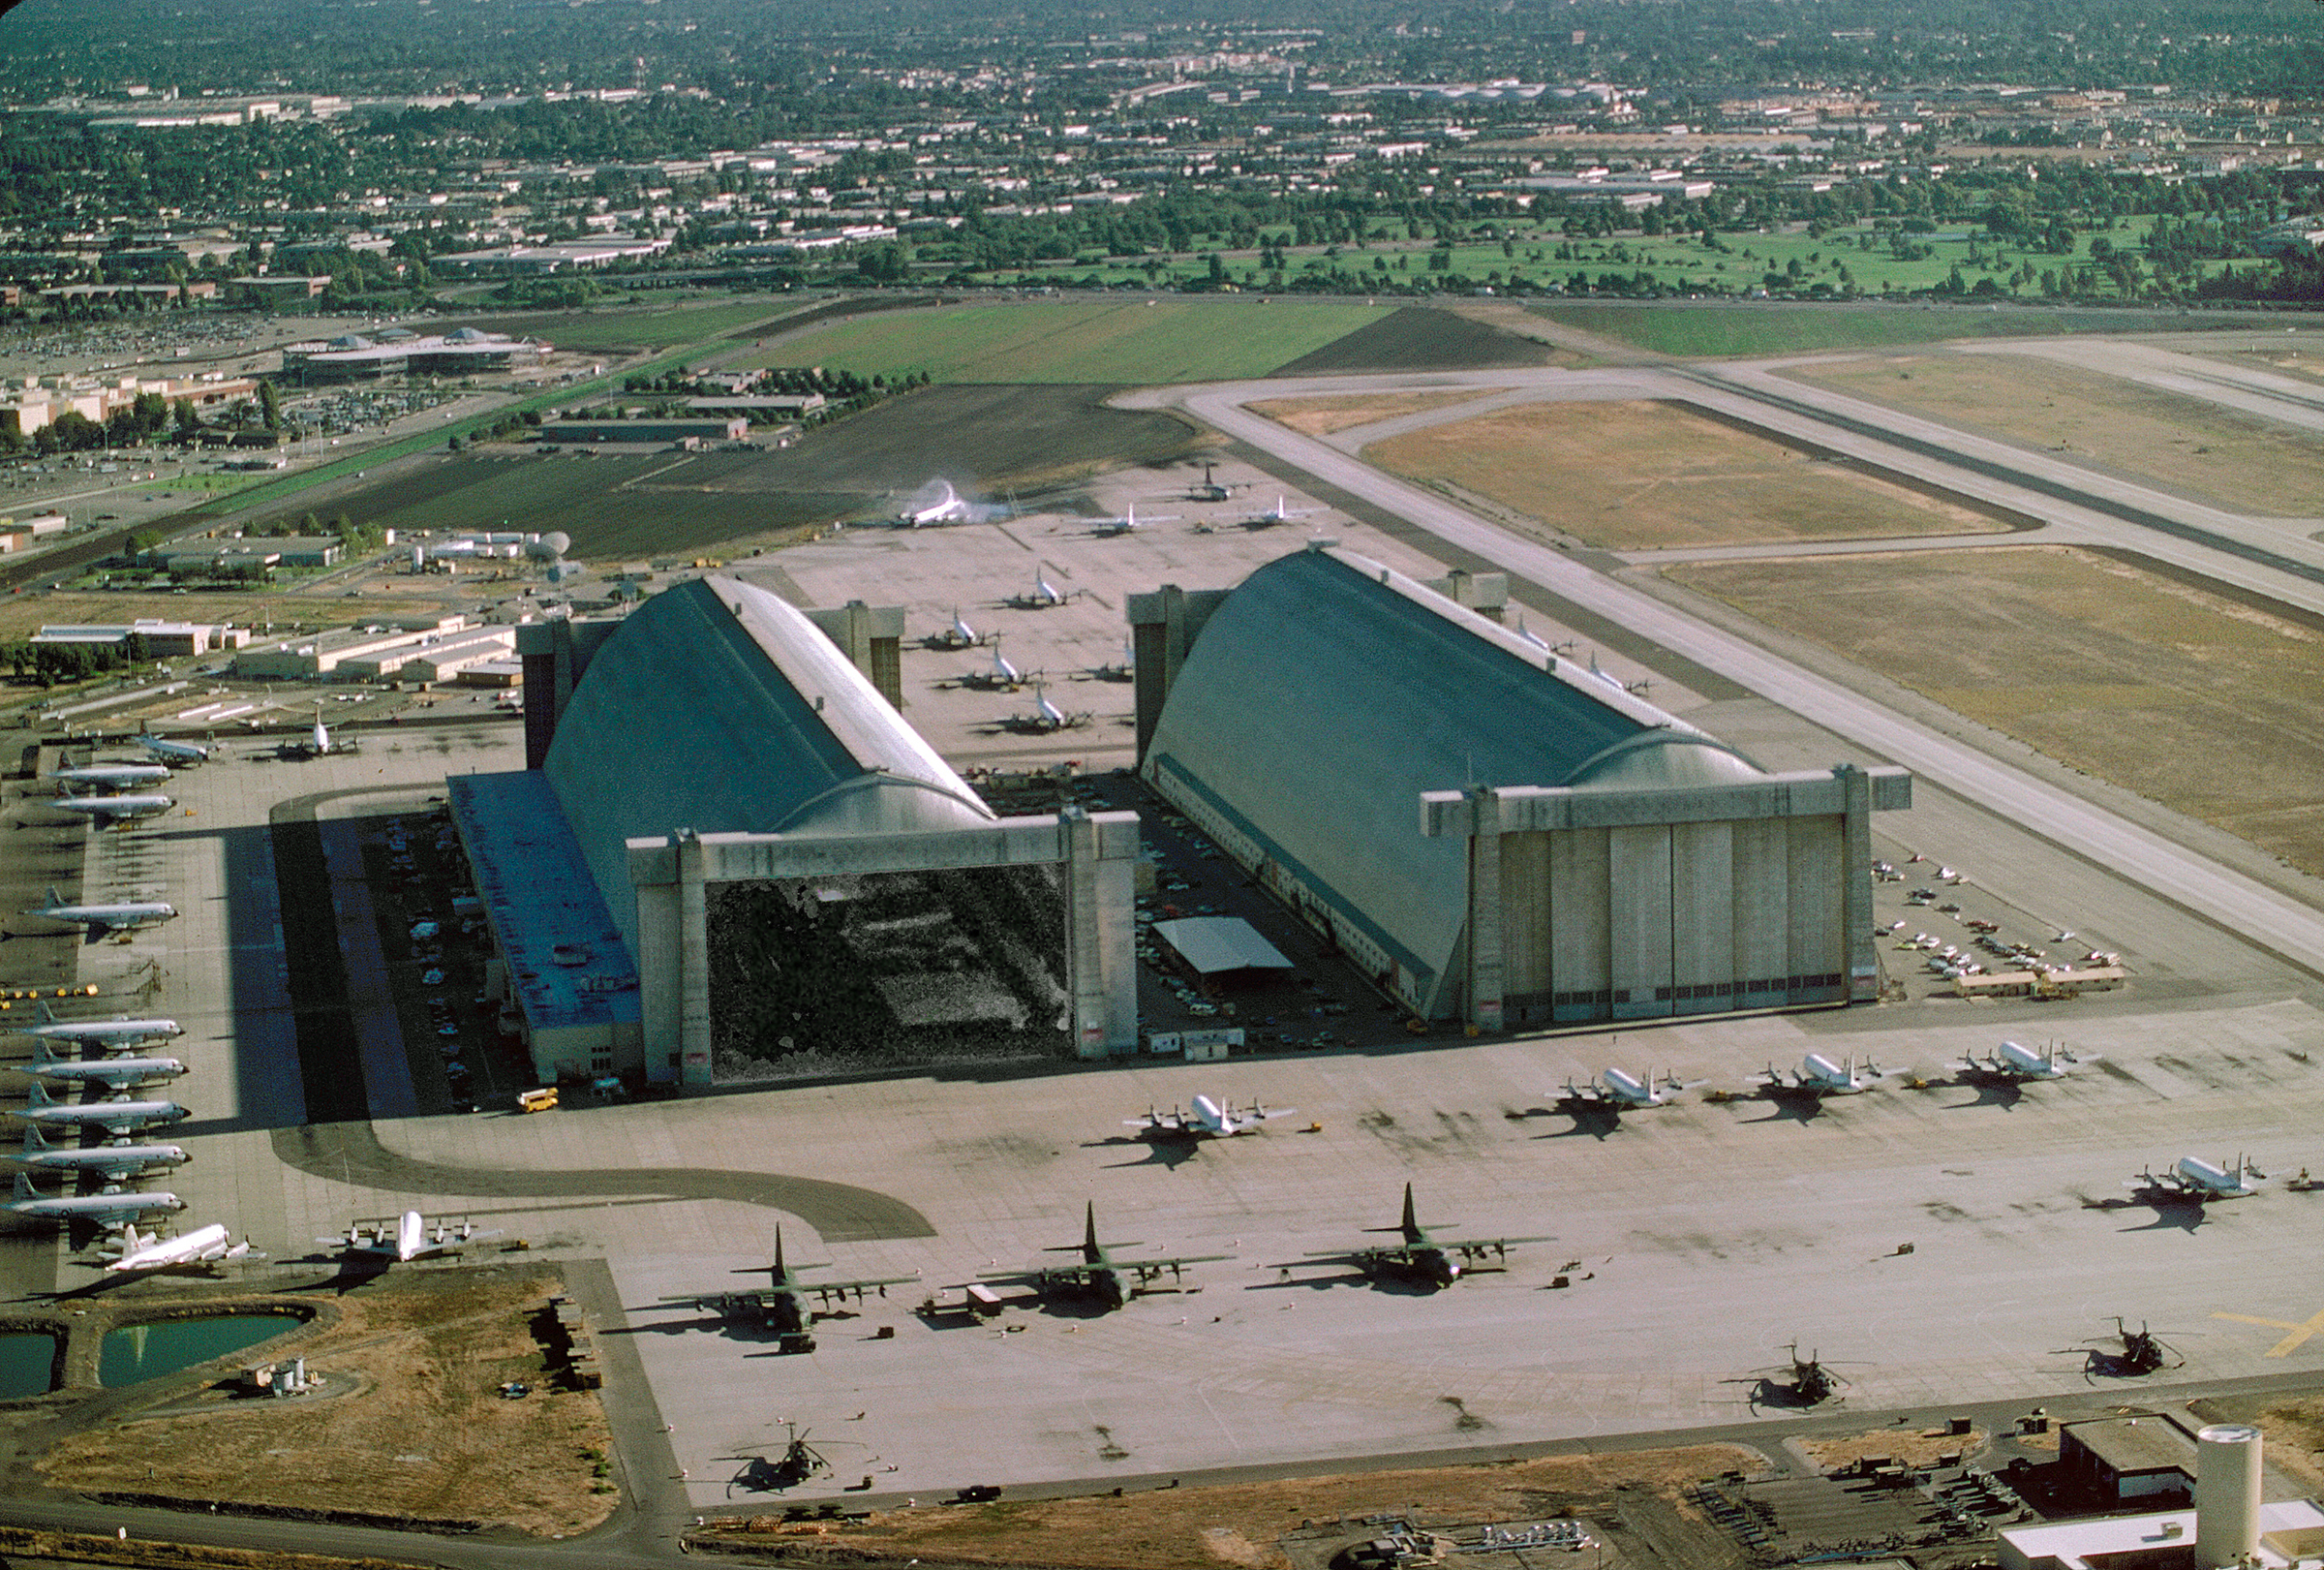 A birds-eye view of the north end of Hangars 3 and 2. The doors of Hangar 3 are open. 3 cargo planes, 3 helicopters, and 28 P-3 planes are parked outside.